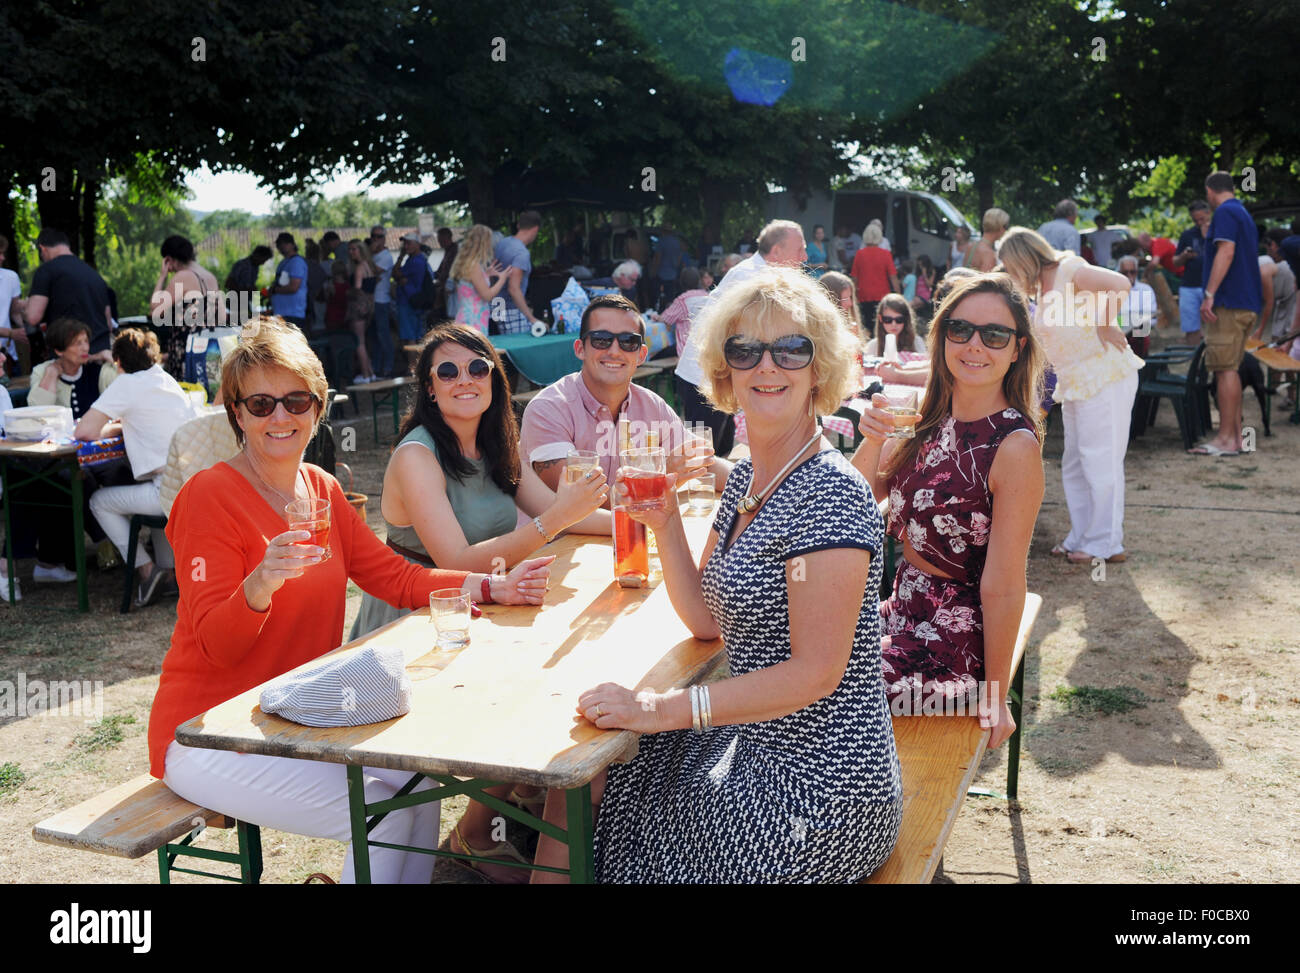 Family and friends on holiday enjoy the Picnic evening at Loubejac which is a small commune or village in the Dordogne region Stock Photo